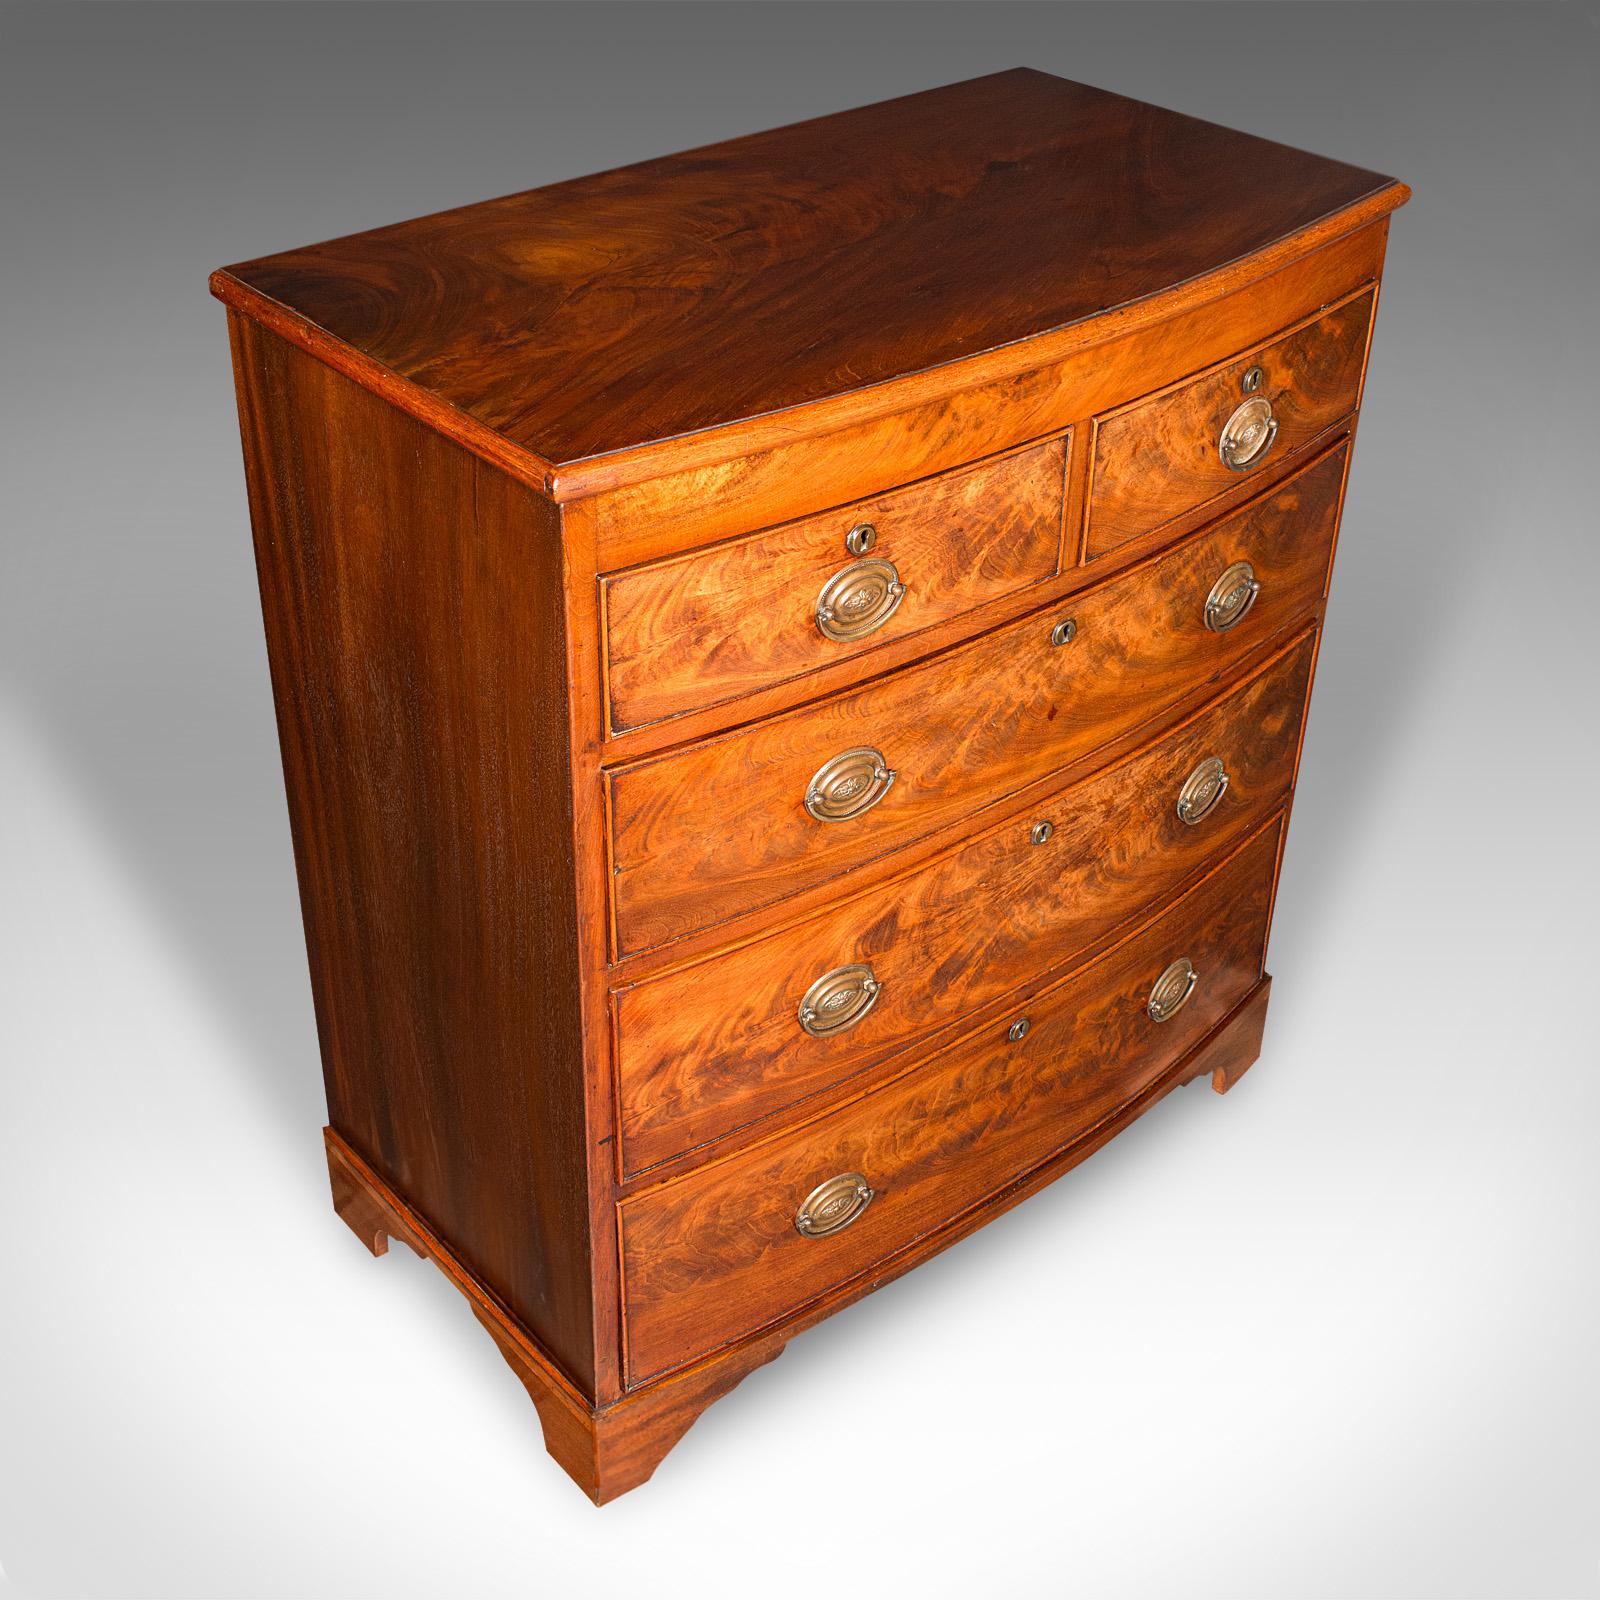 Wood Antique Bow Front Chest Of Drawers, English, Tallboy, Bedroom, Georgian, C.1800